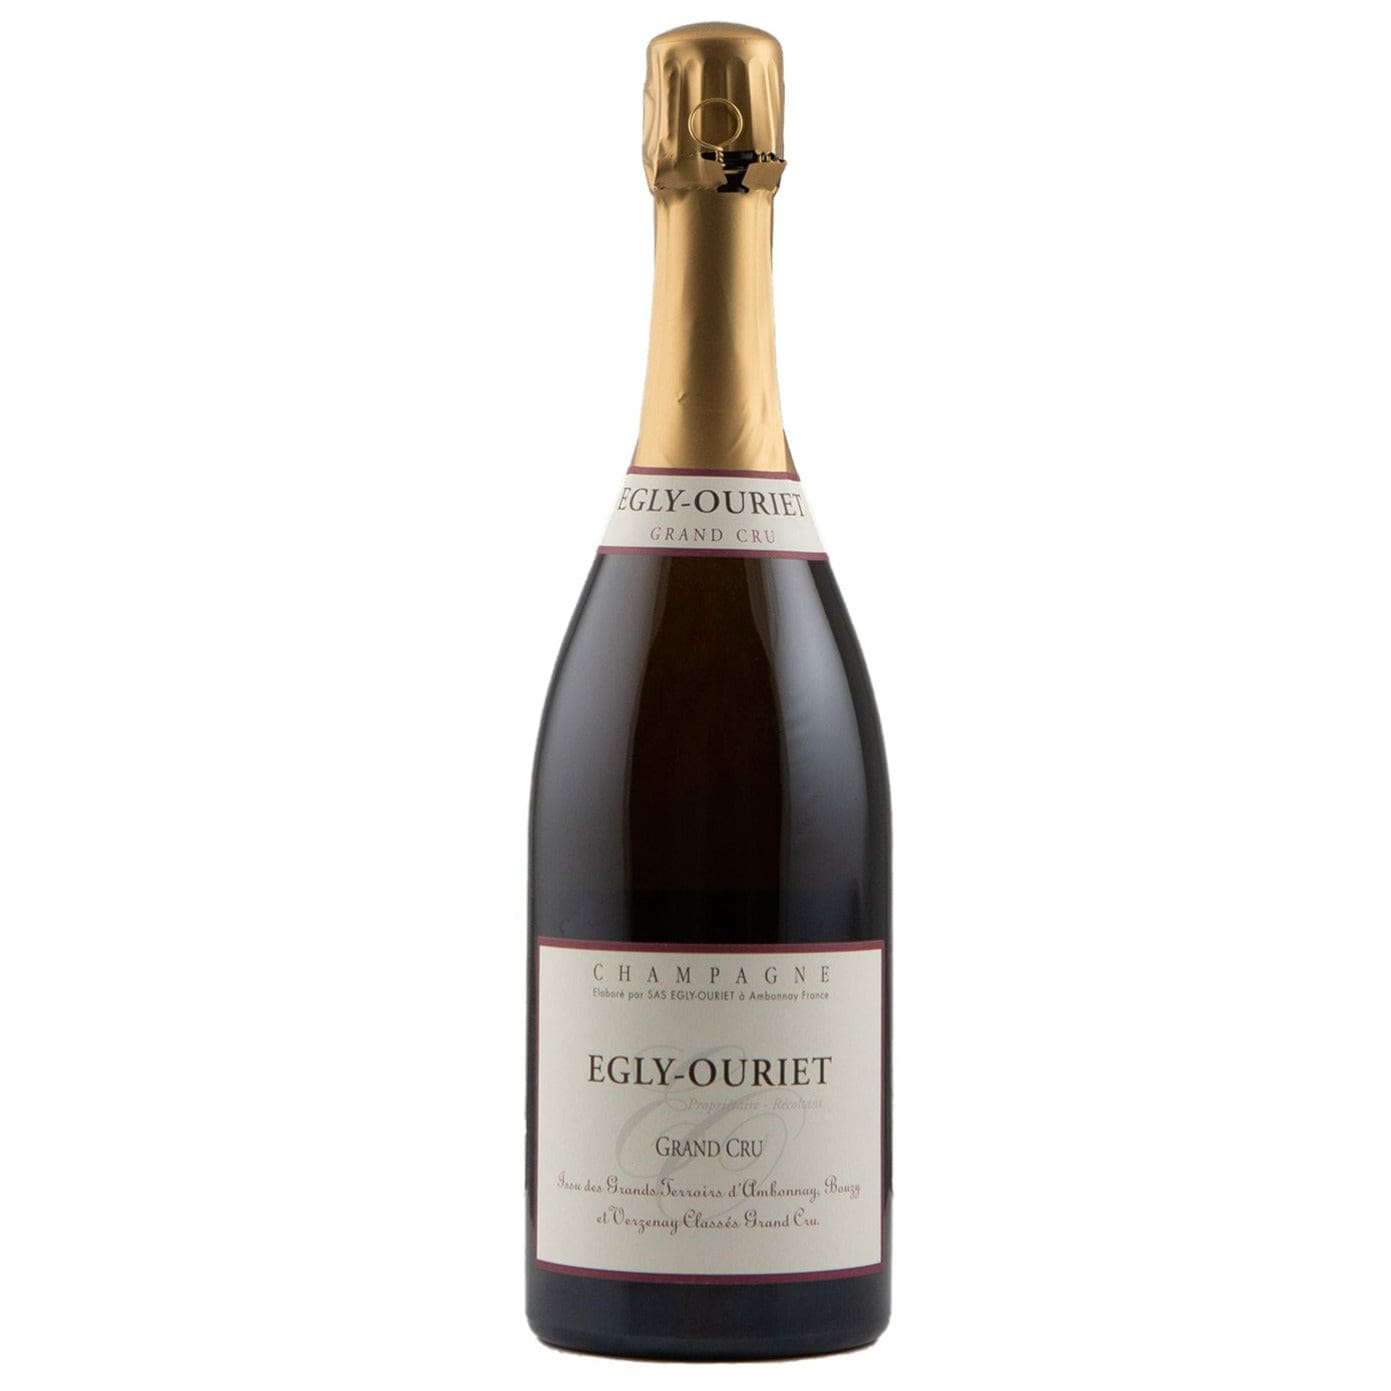 Single bottle of Sparkling wine Egly-Ouriet, Grand Cru Millesime, Champagne, NV 70% Pinot Noir & 30% Chardonnay